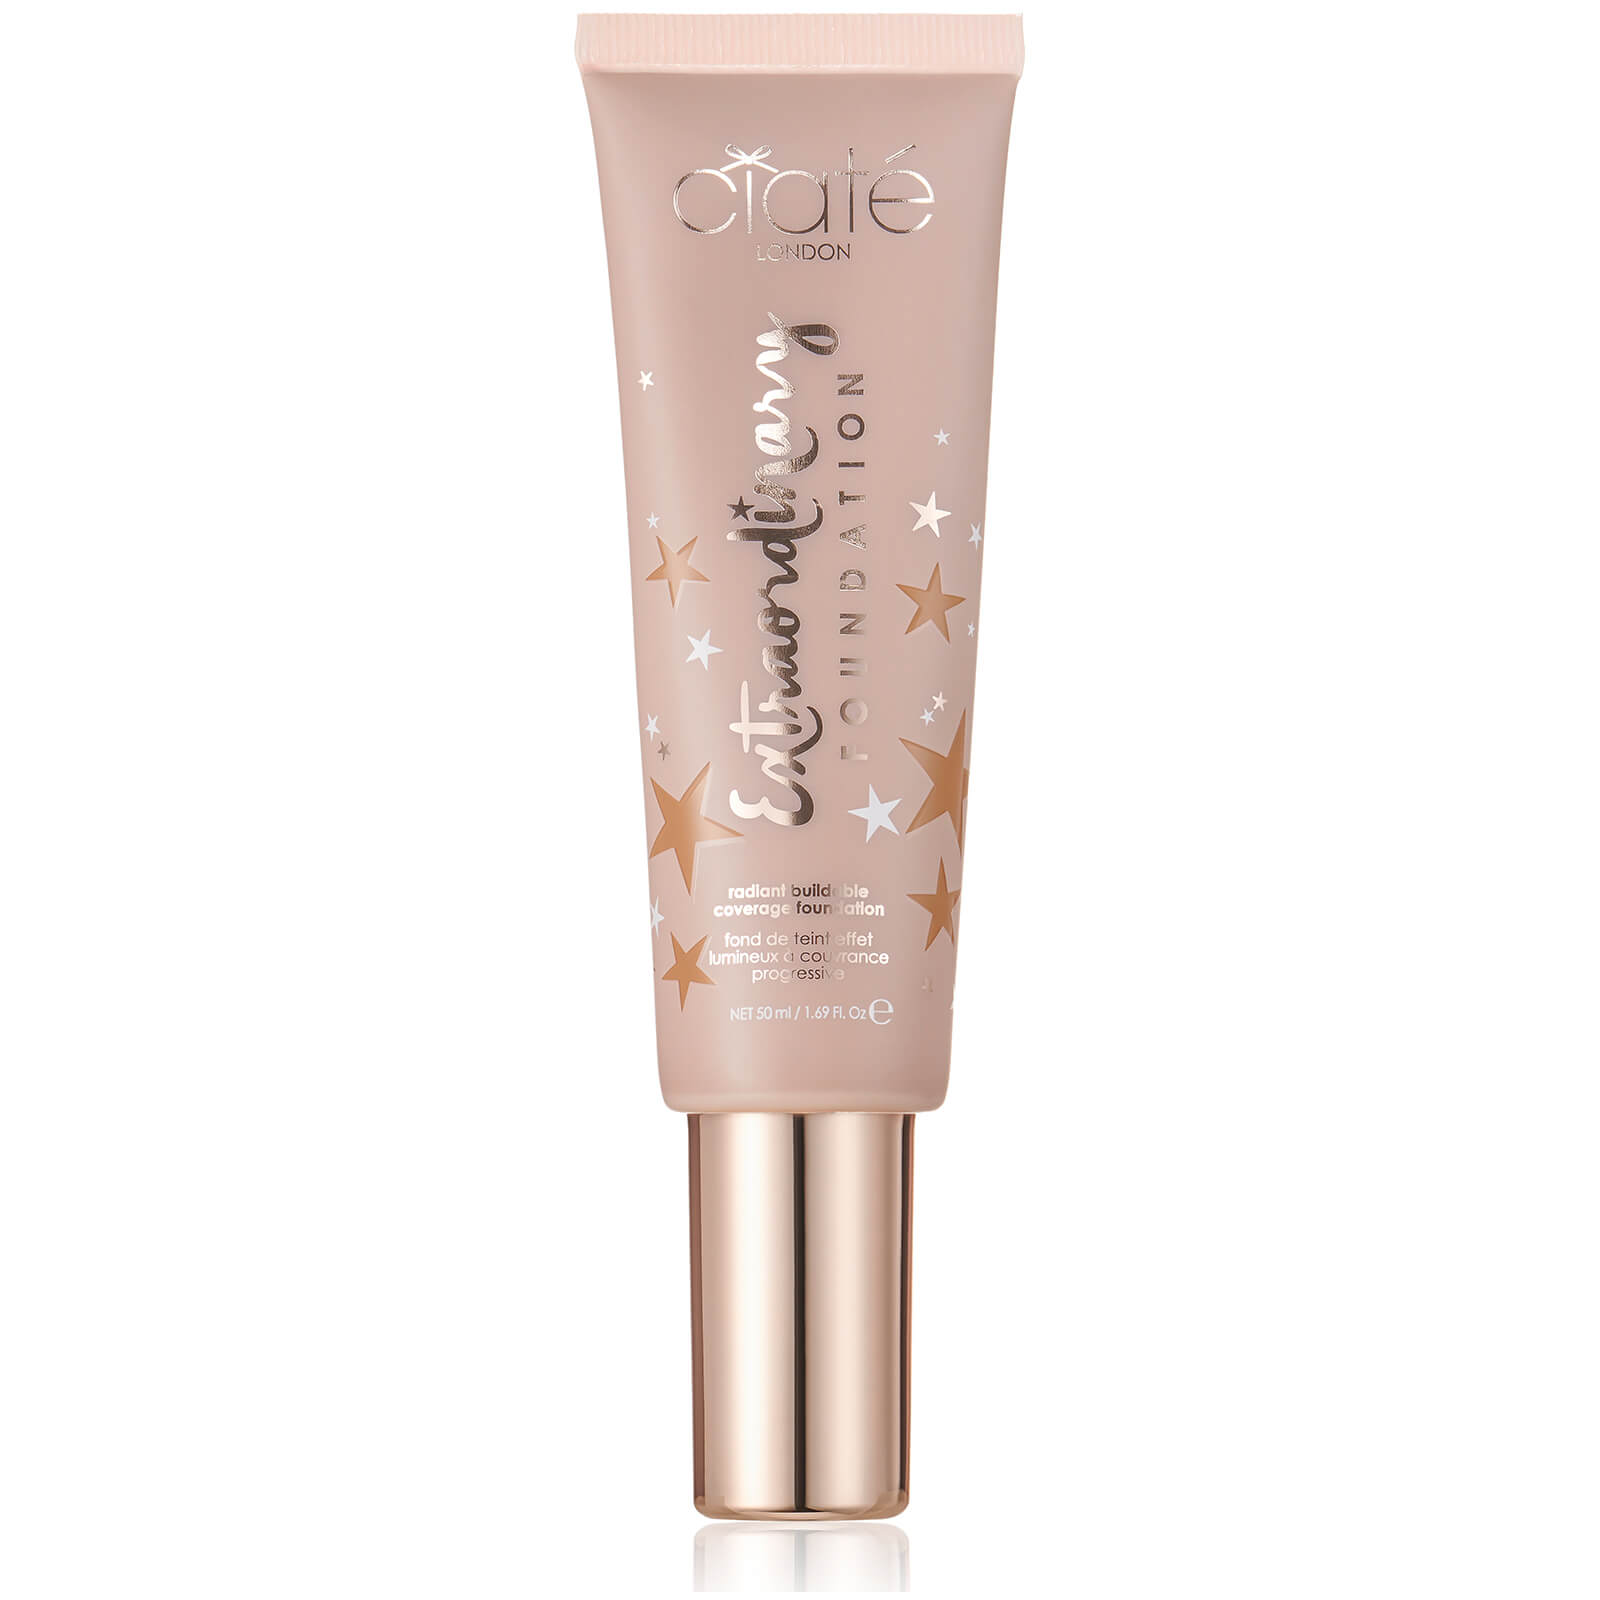 Image of Ciaté London Extraordinary Radiant Buildable Liquid Foundation 50ml (Various Shades) - 124Y Biscuit